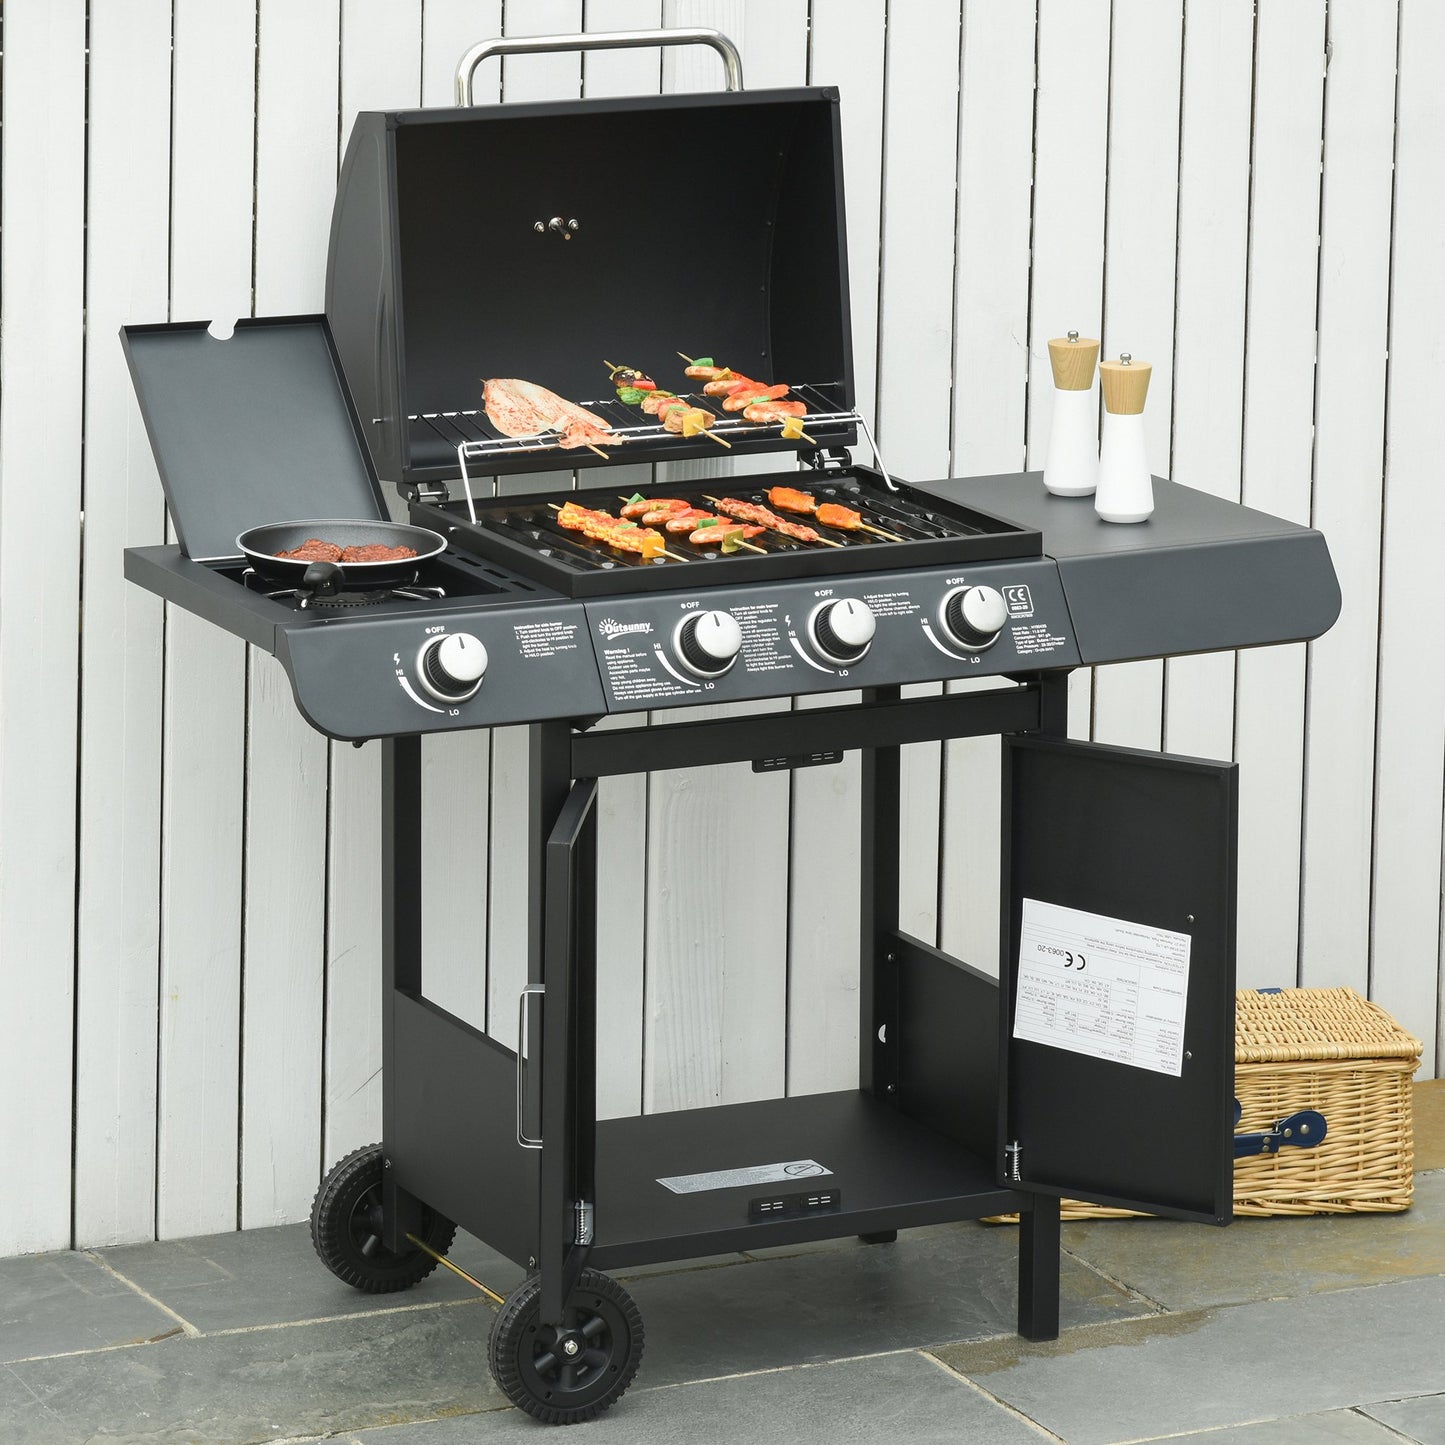 Outsunny Deluxe Gas Barbecue Grill 3+1 Burner Garden BBQ Large Cooking Area Side Burner